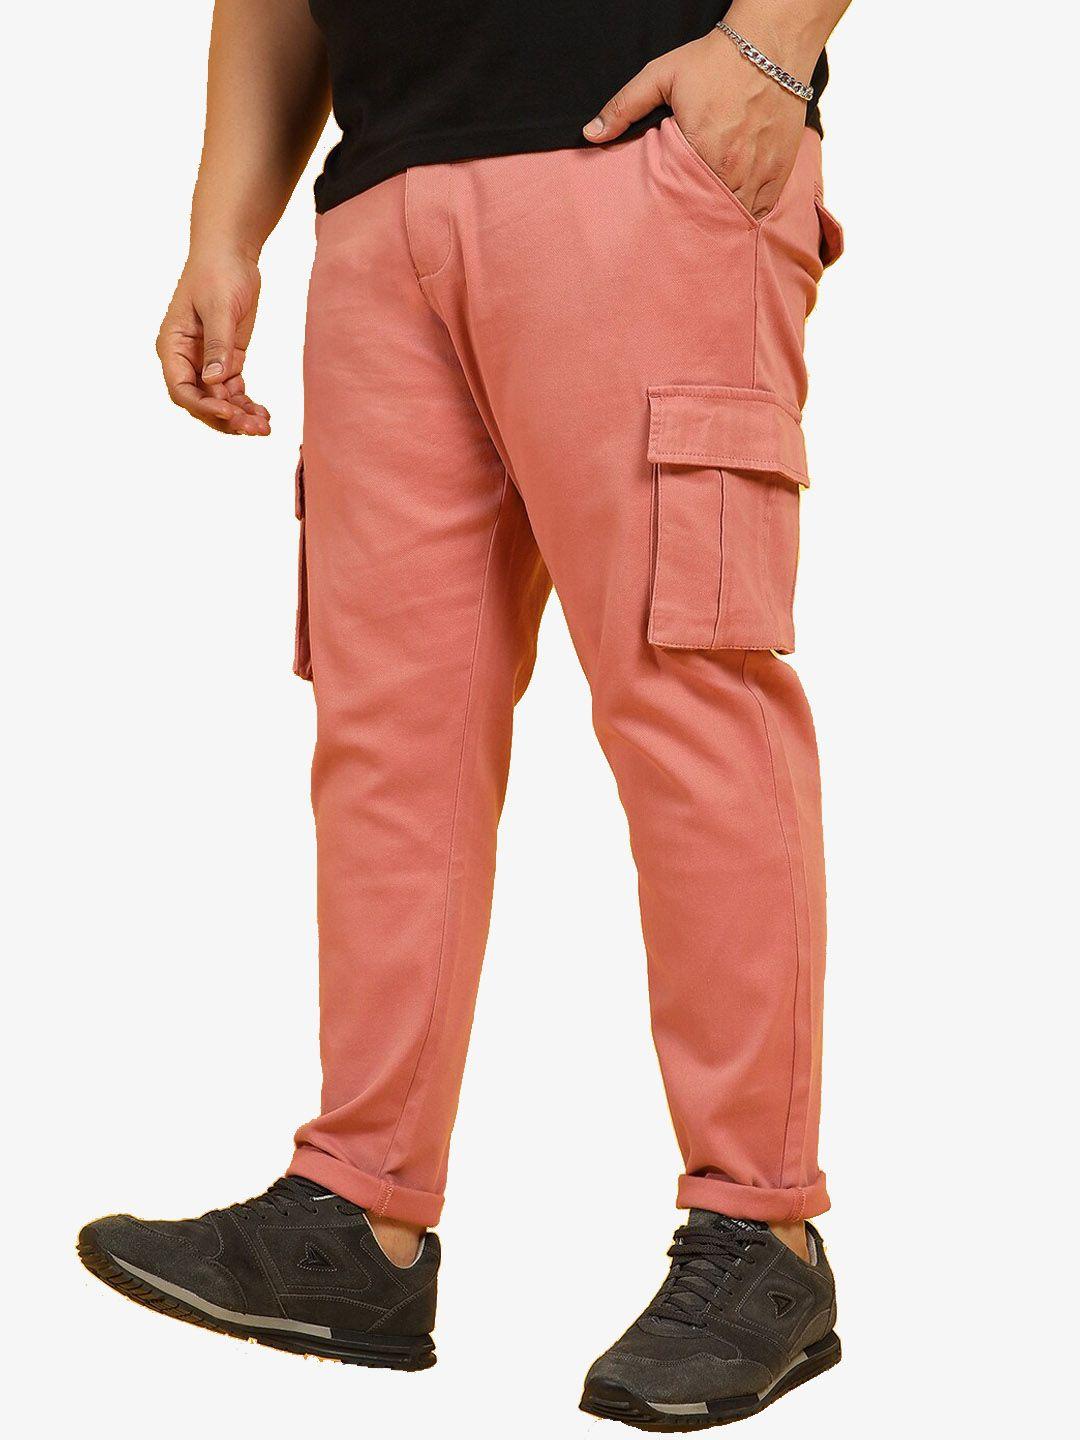 instafab plus men relaxed easy wash cargos trousers